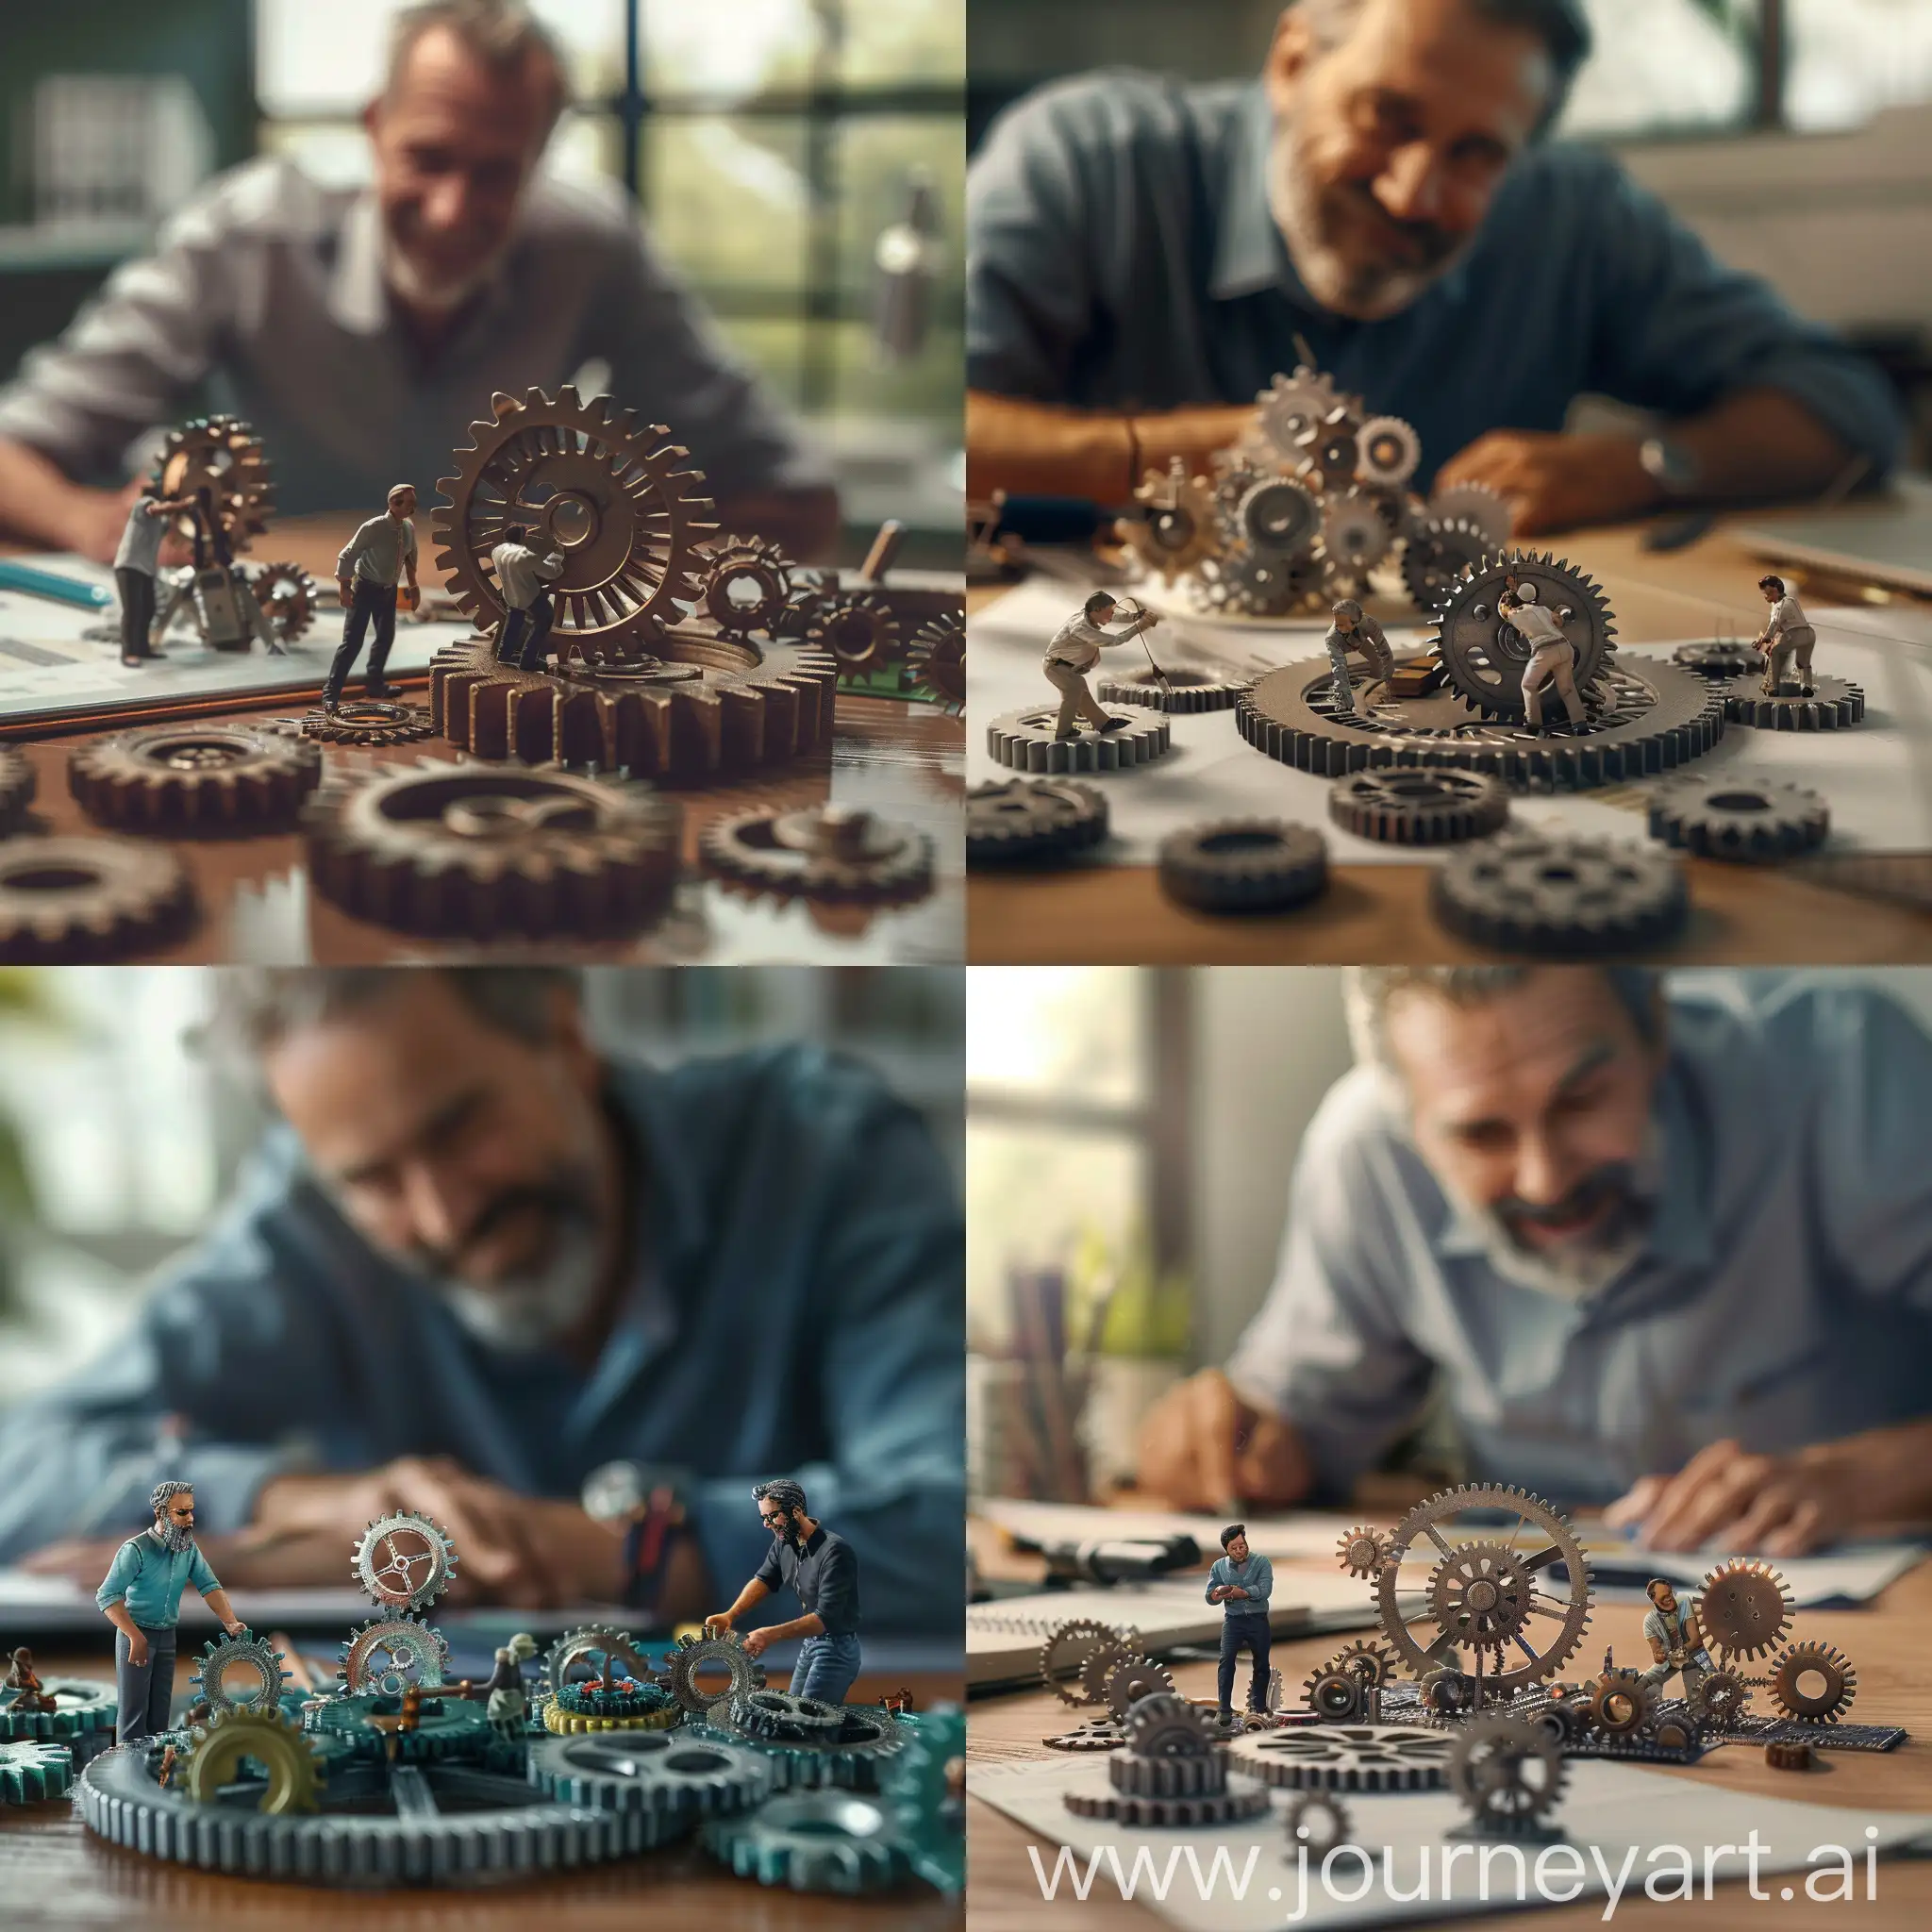 Photorealistic daylight image of a miniature business team working to build a system of cogs and gears on the desk of a corporate manager. In the background, the manager is watching, smiling, and leaning in over the miniature team.